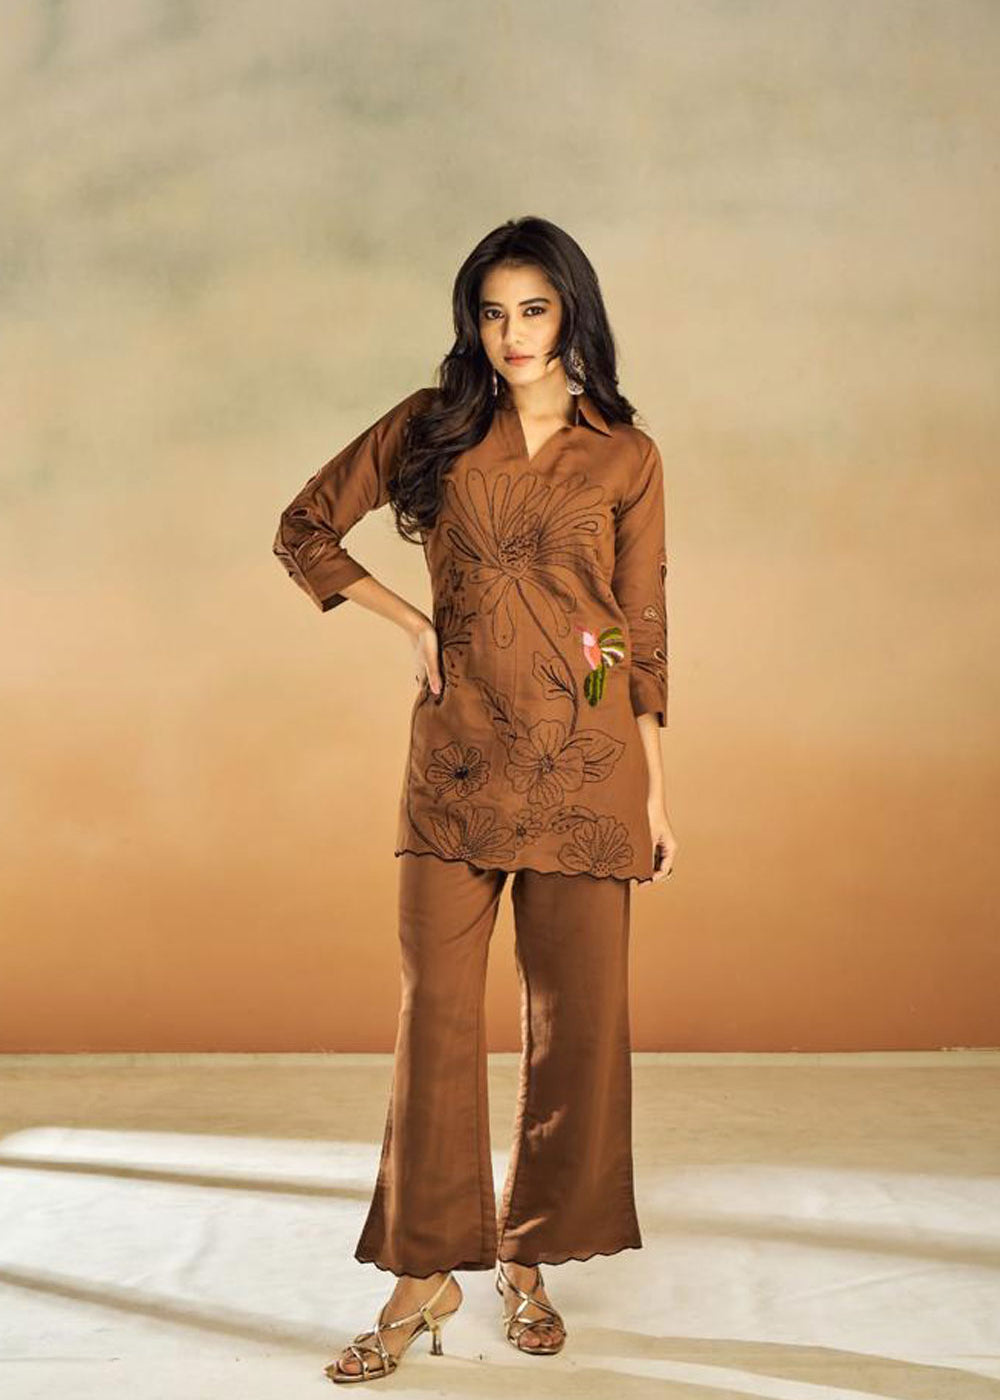 Top and flared trousers set - Co ord Sets - Women